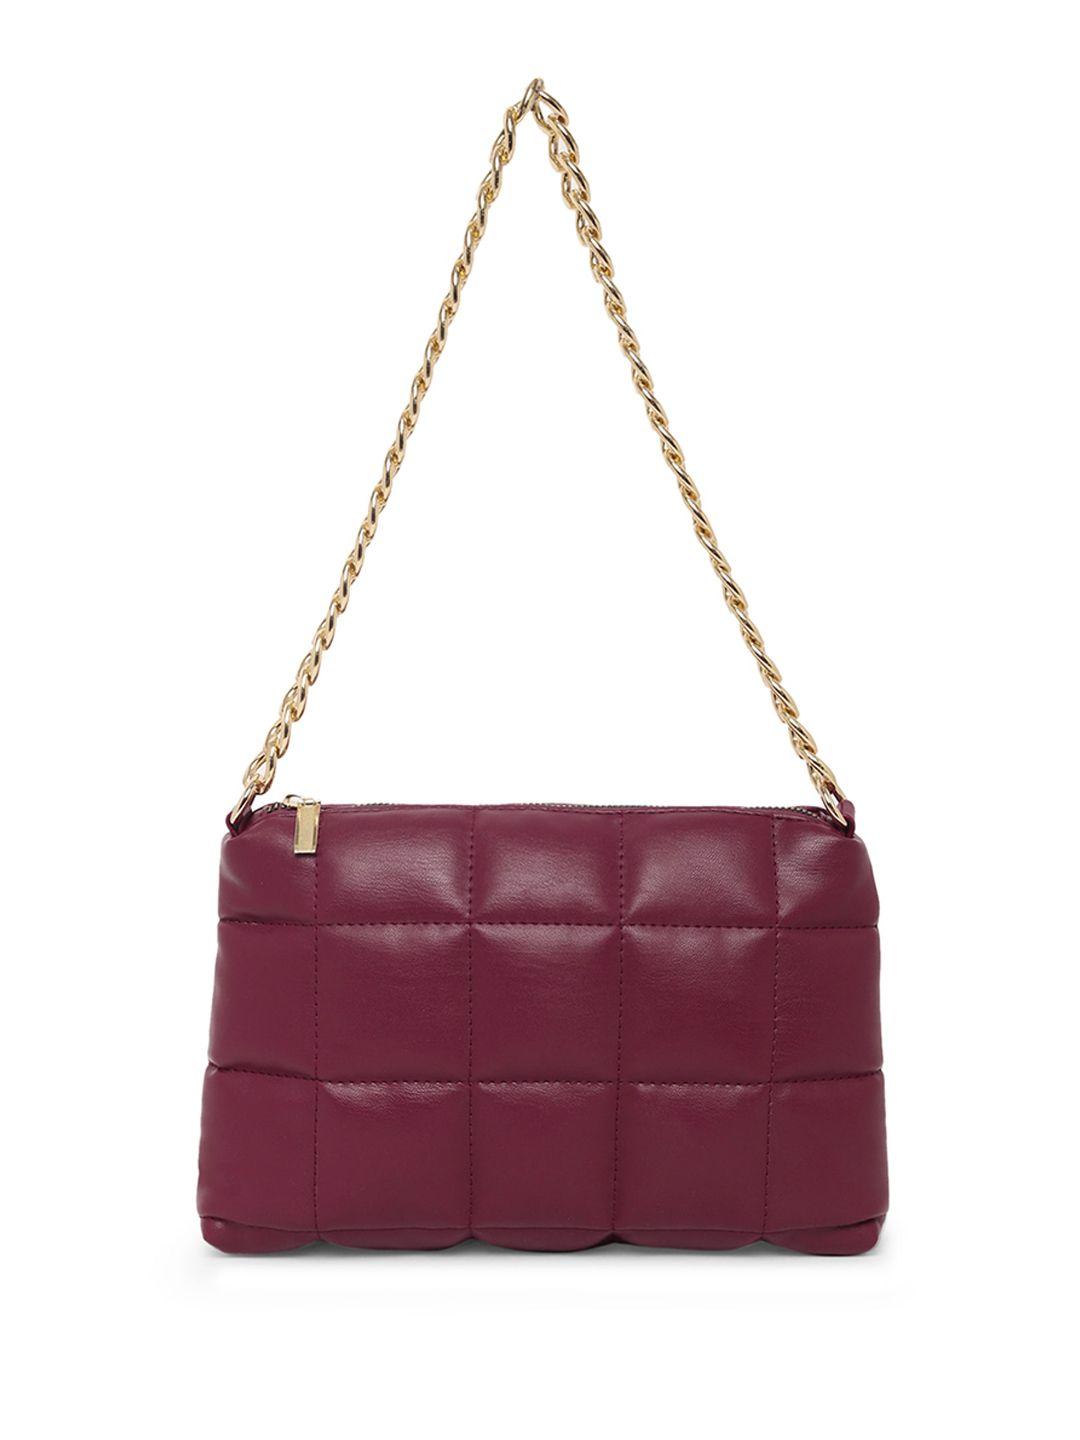 dressberry burgundy structured sling bag with quilted